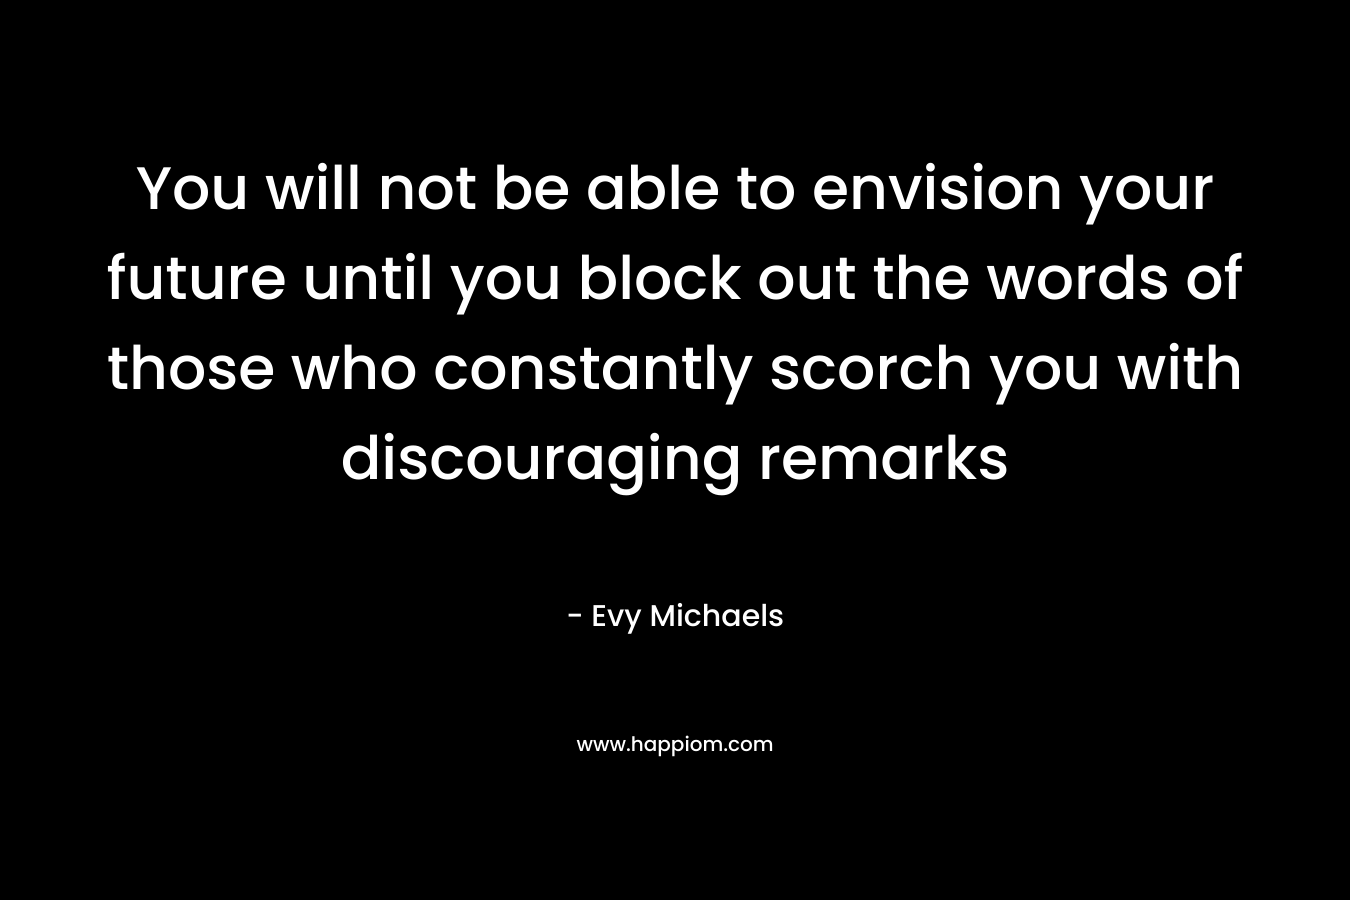 You will not be able to envision your future until you block out the words of those who constantly scorch you with discouraging remarks